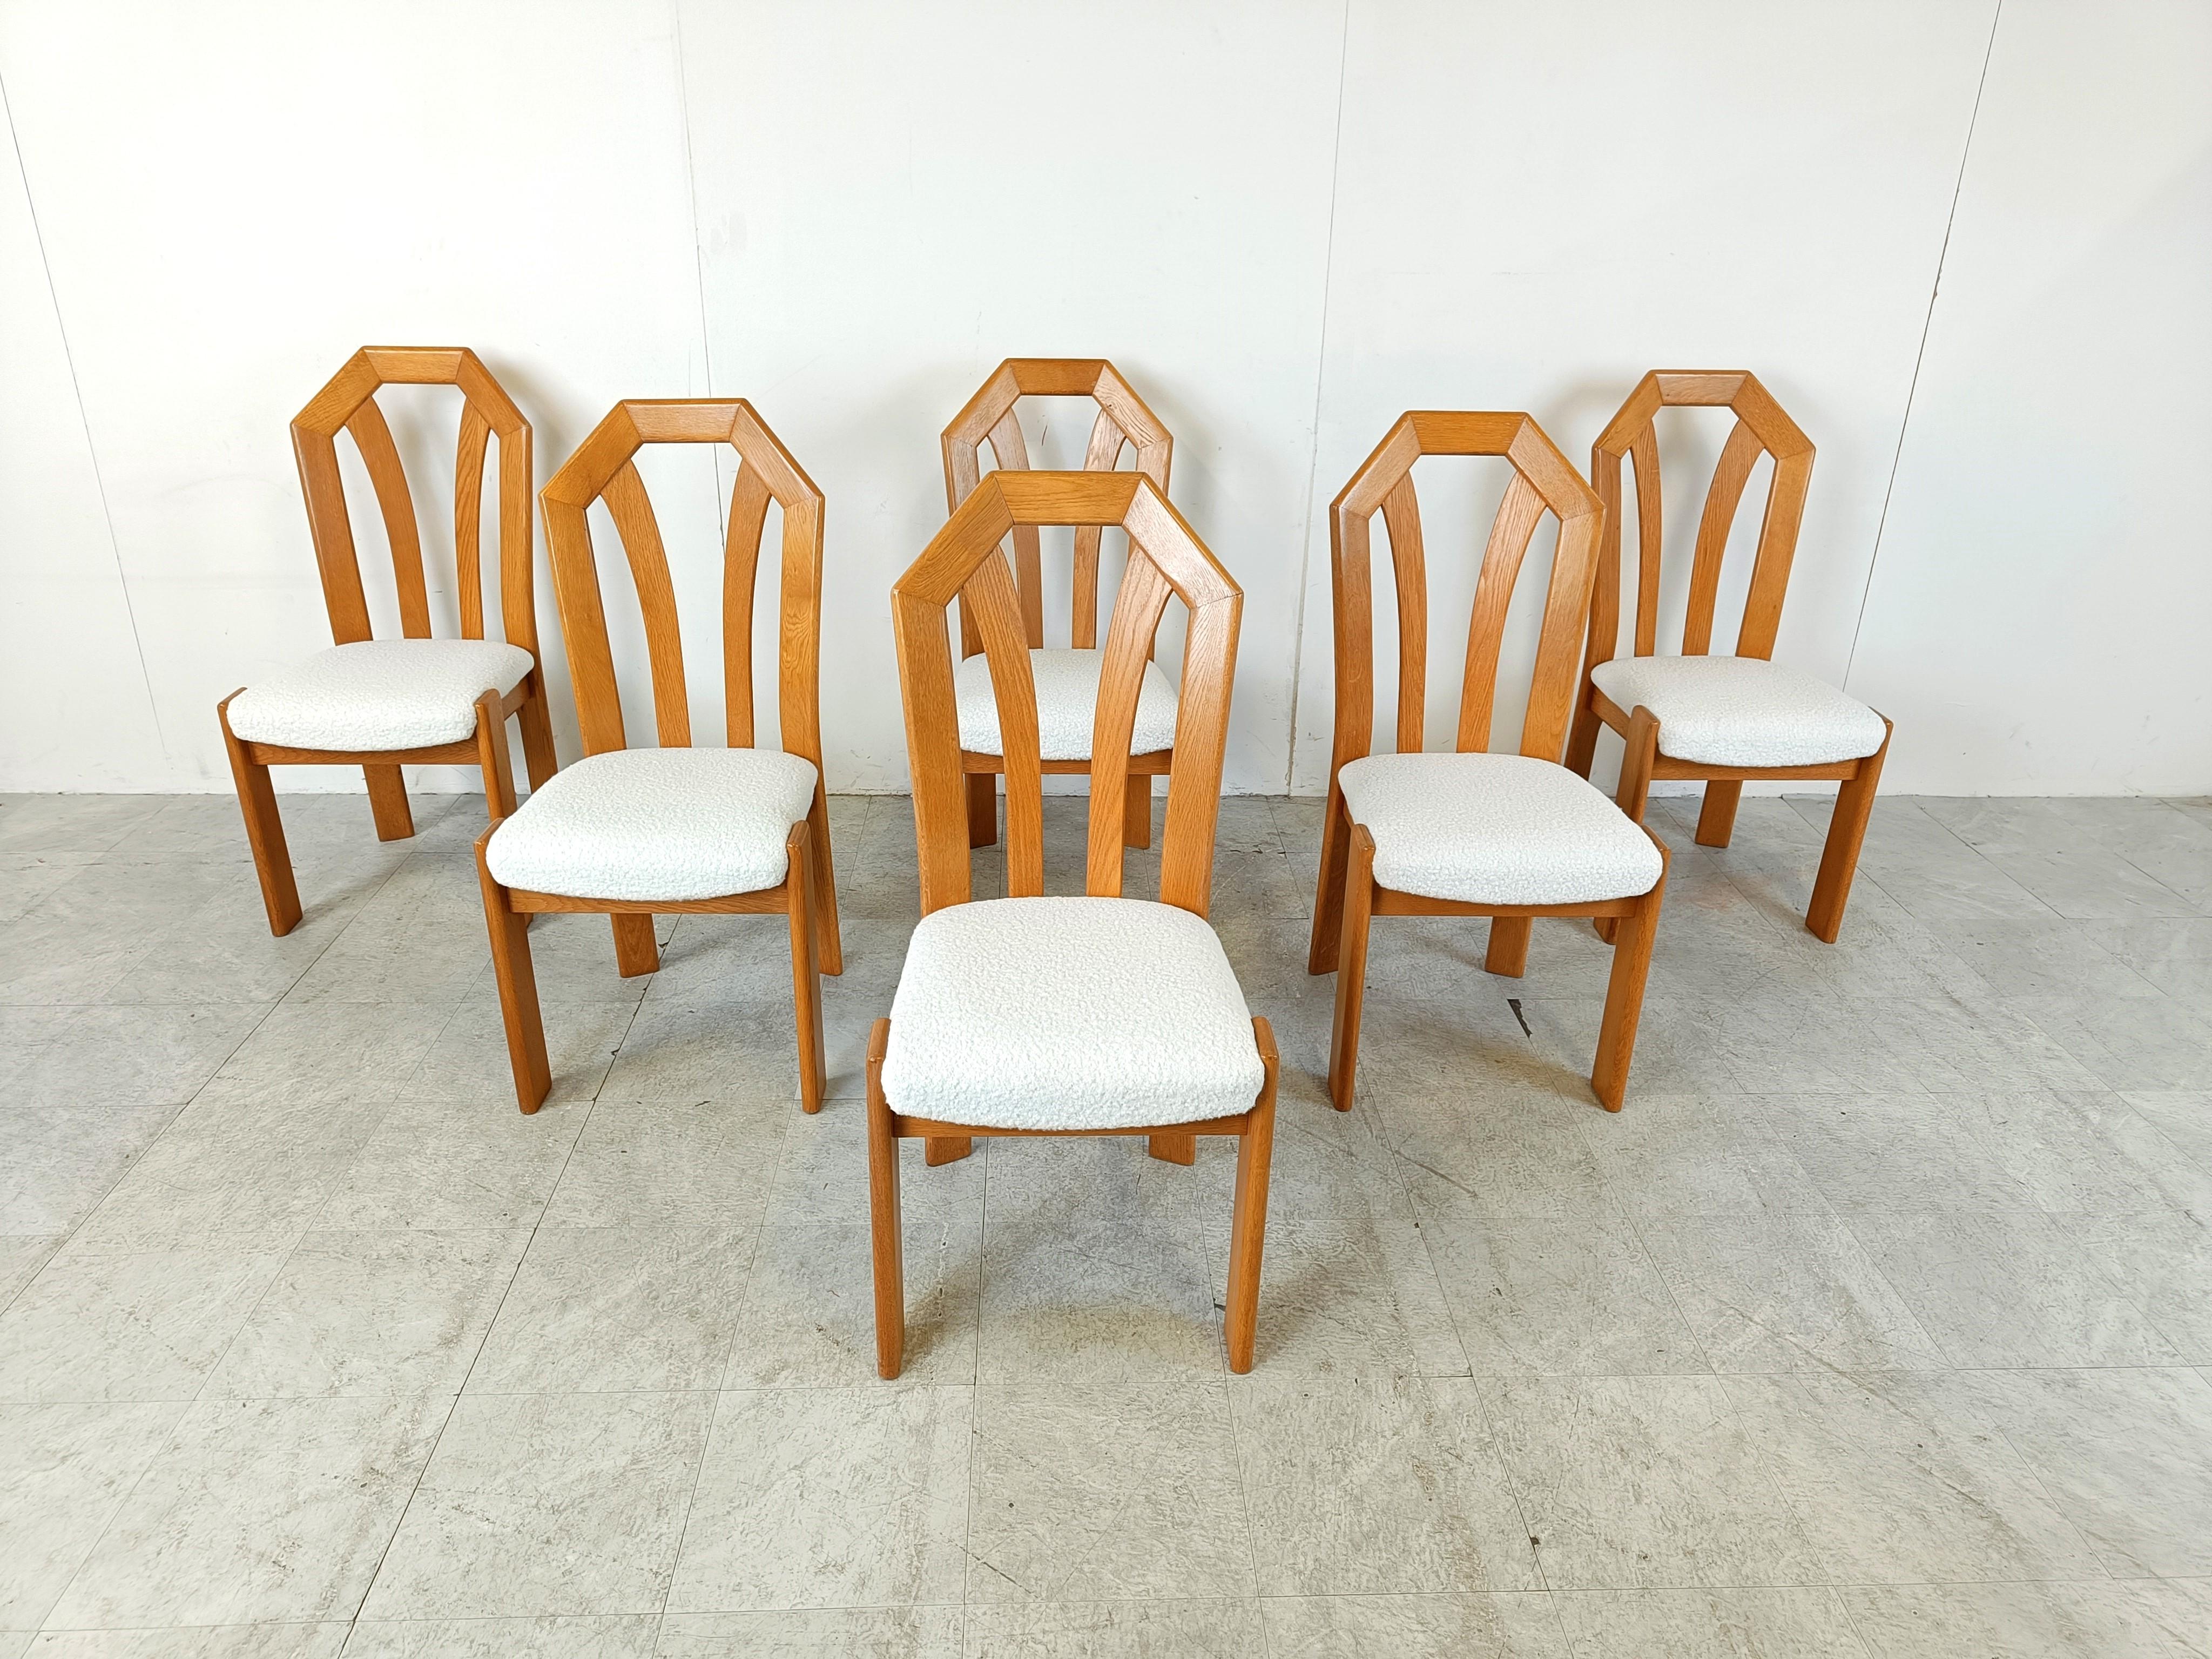 Brutalist dining chairs with a bentwood oak frame and reupholstered white bouclé seats.

The white upholstery gives the chairs a nice fresh and contrasting look

Good condition

1970s - Belgium

Good condition

Height: 100cm/39.37